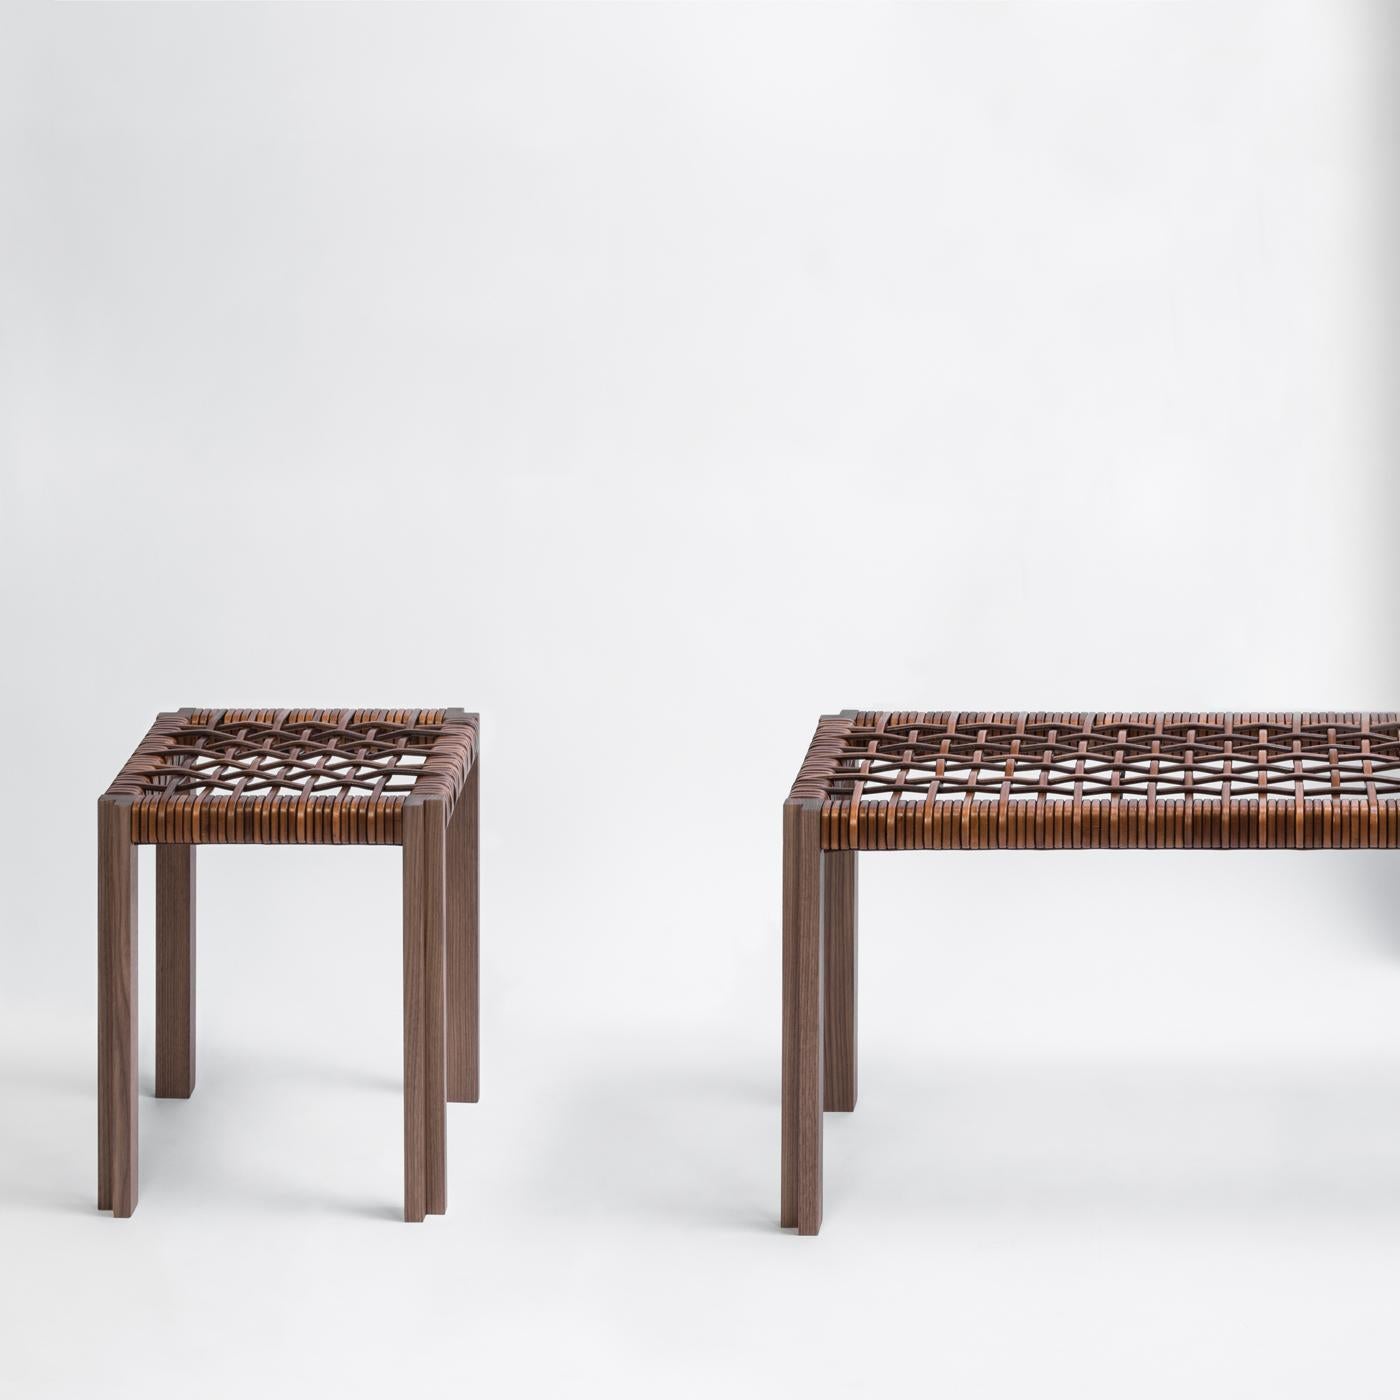 The standout element of this superb bench, part of the Structura collection, is its striking seat in interlacing leather strips. Supported by a walnut-finished wood structure and legs with L-shaped cross section, this bench will be a versatile